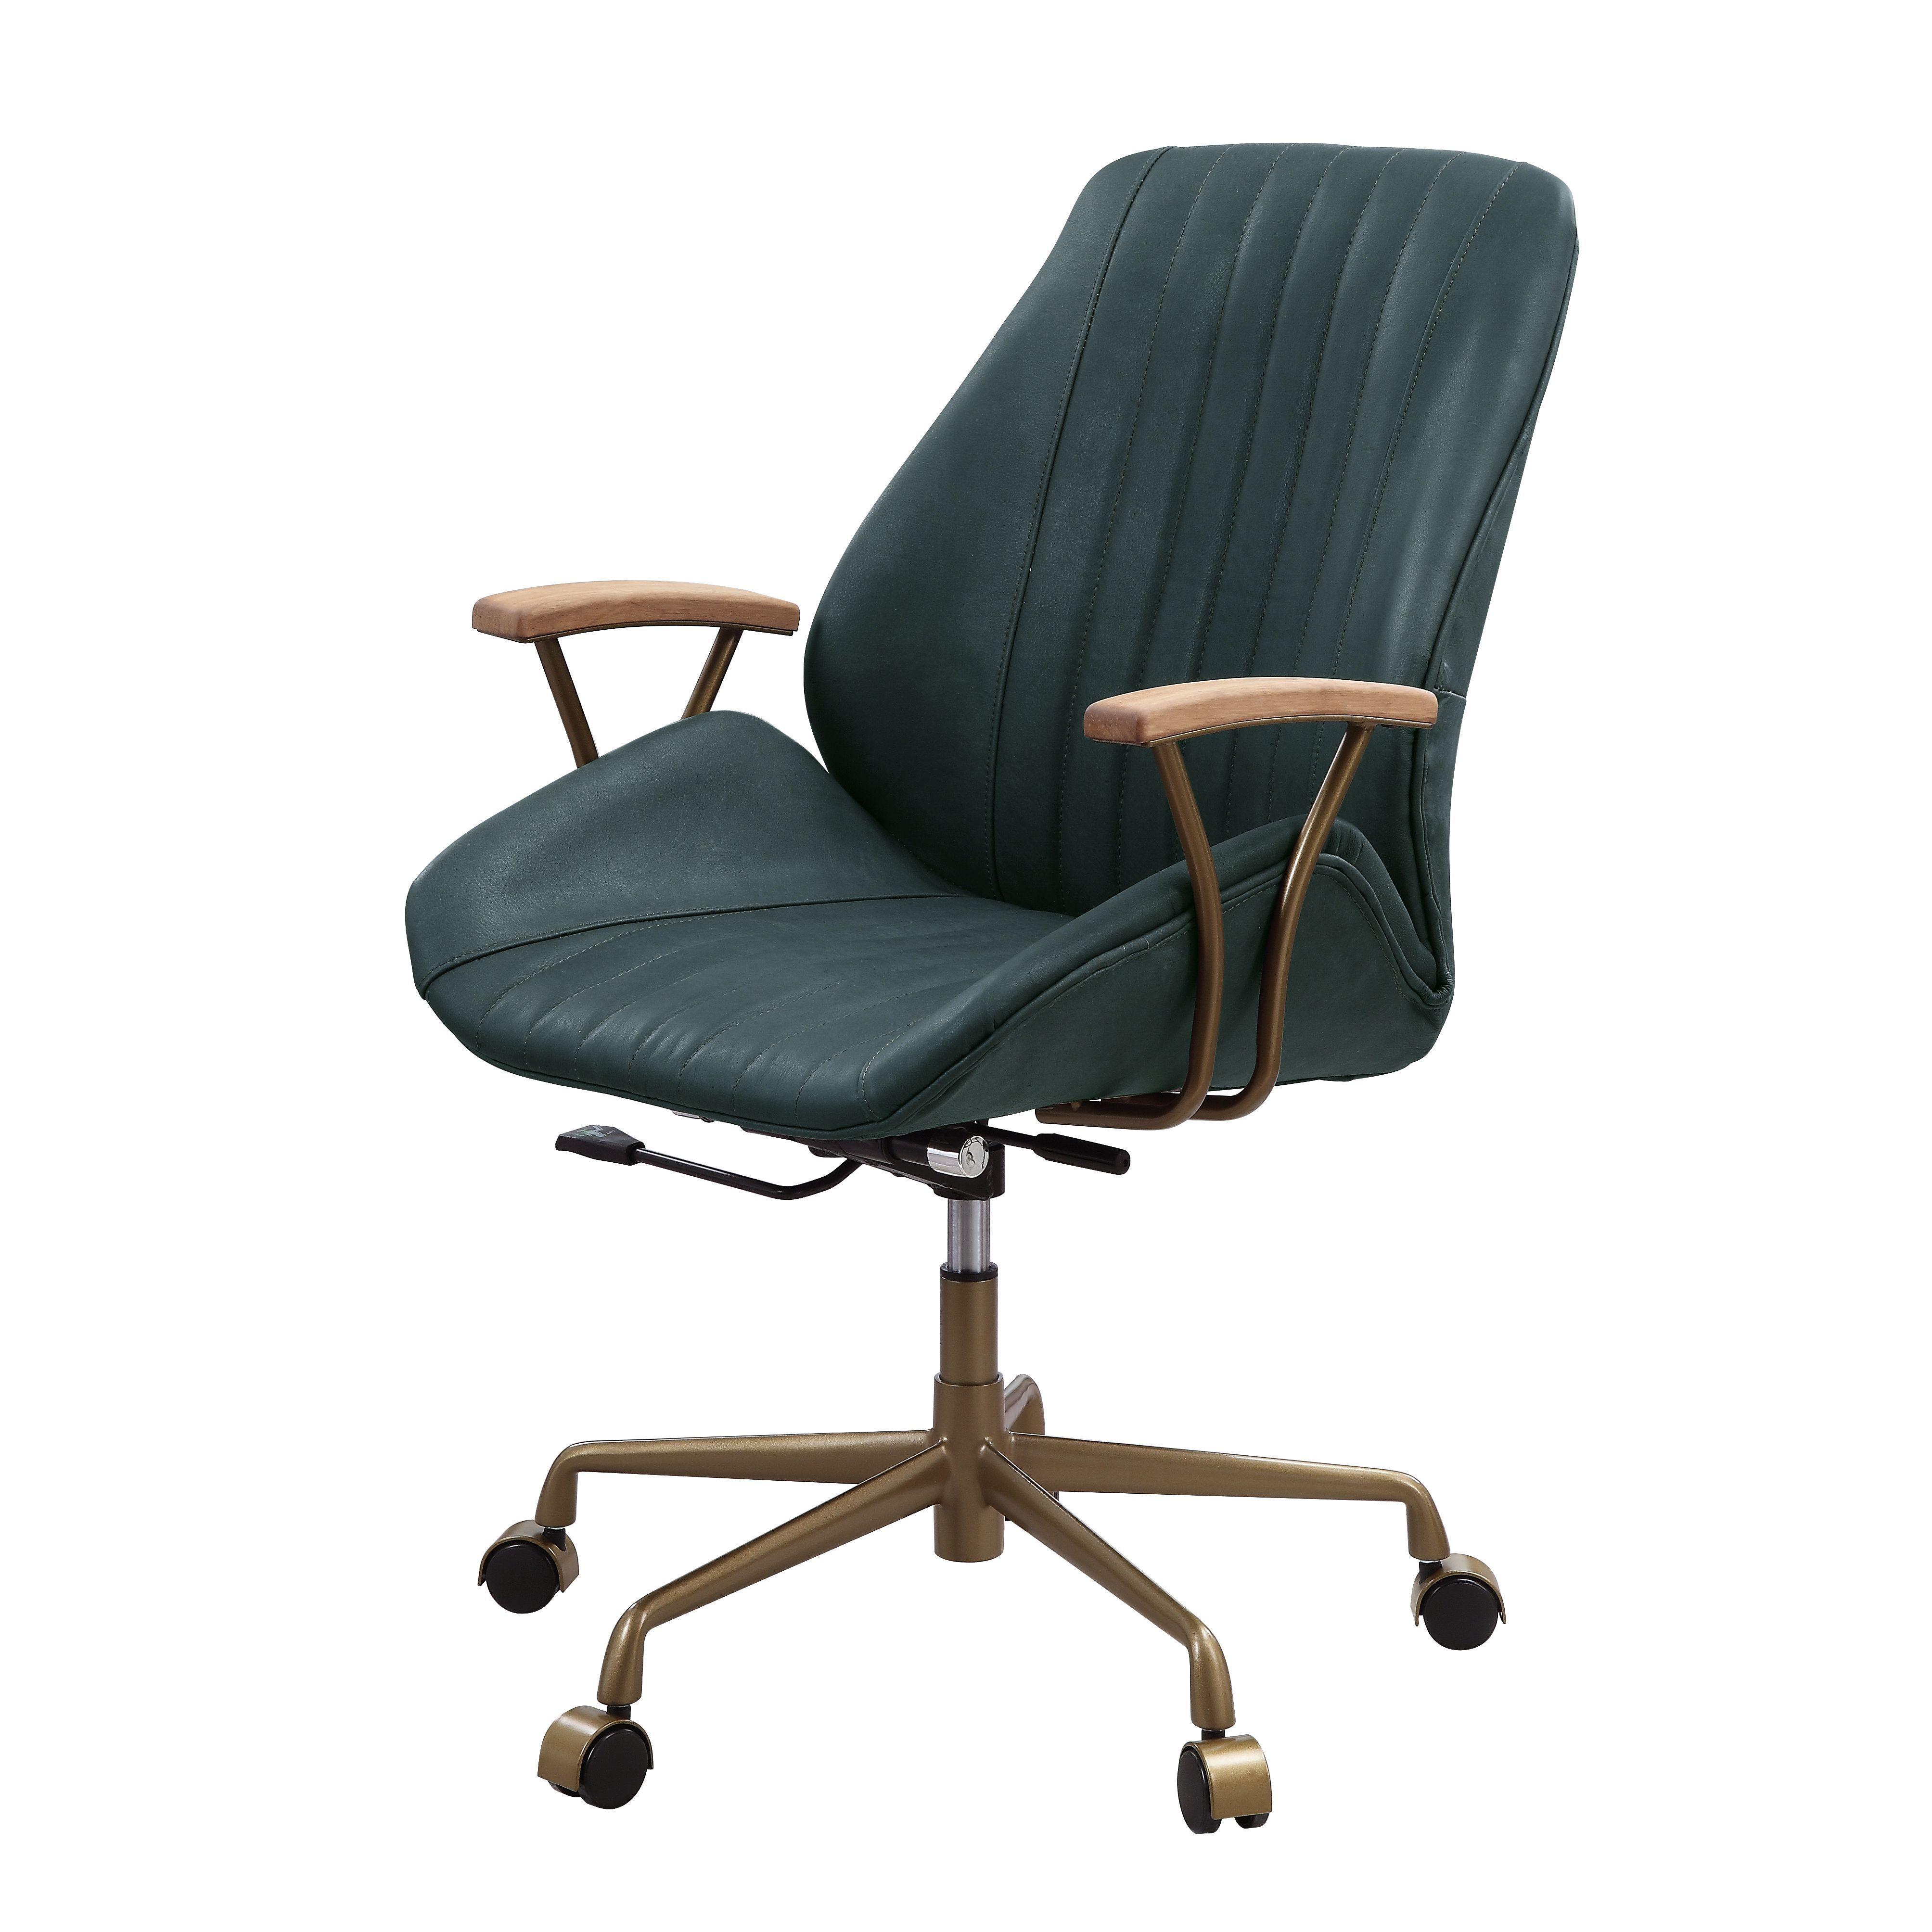 Modern, Classic Home Office Chair Argrio 93240 in Green Top grain leather